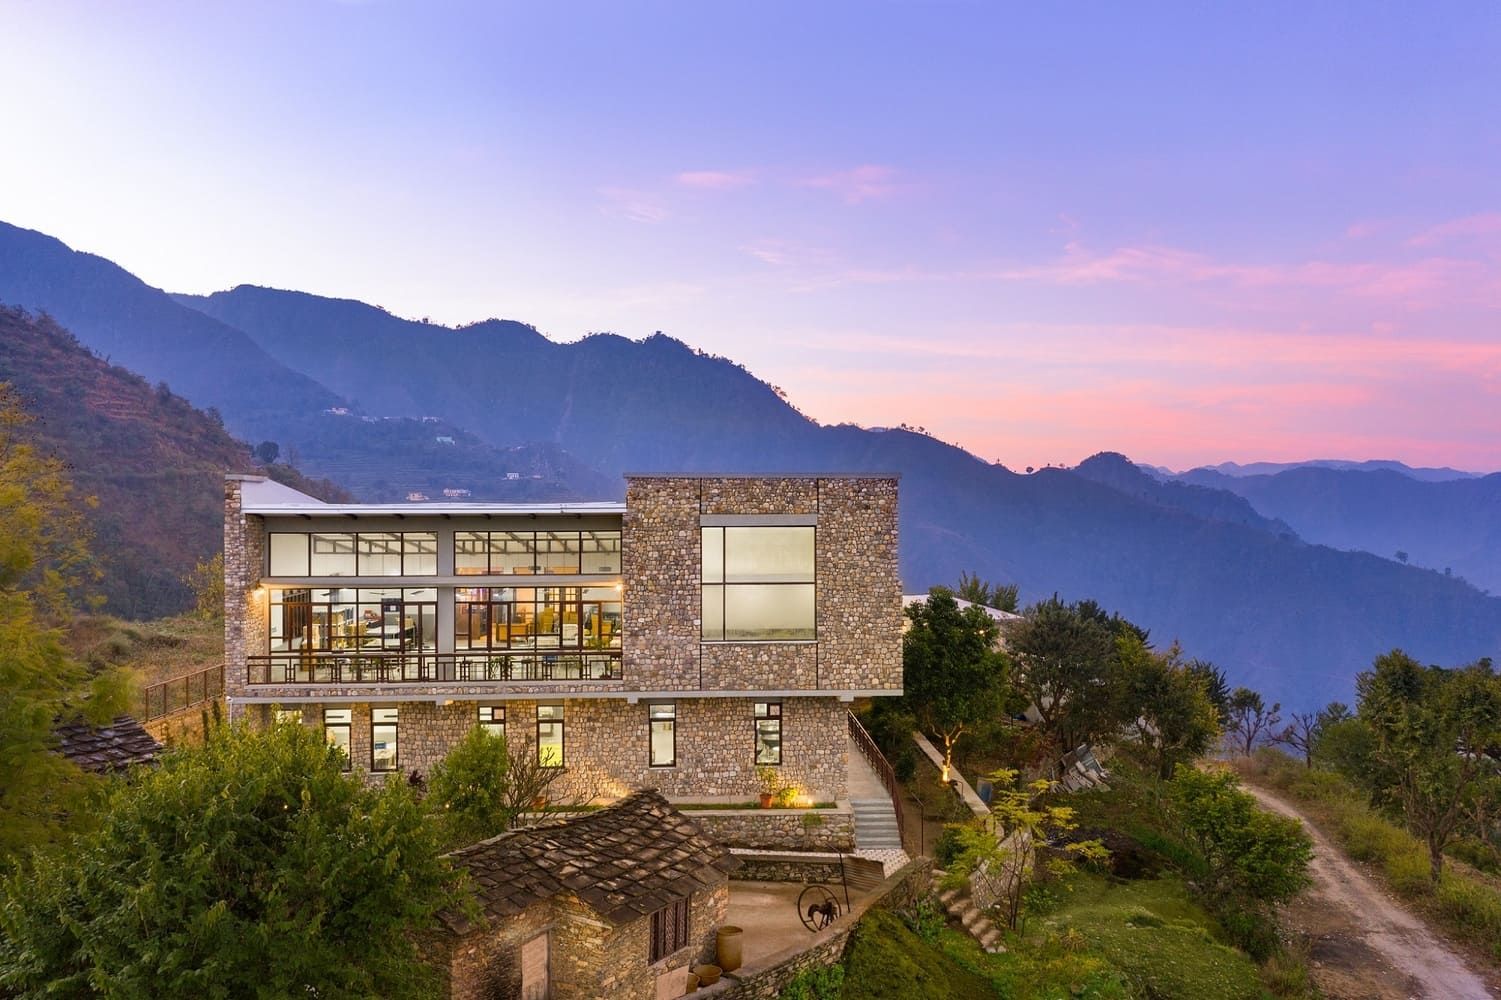 Building on a hilltop with mountains in the background